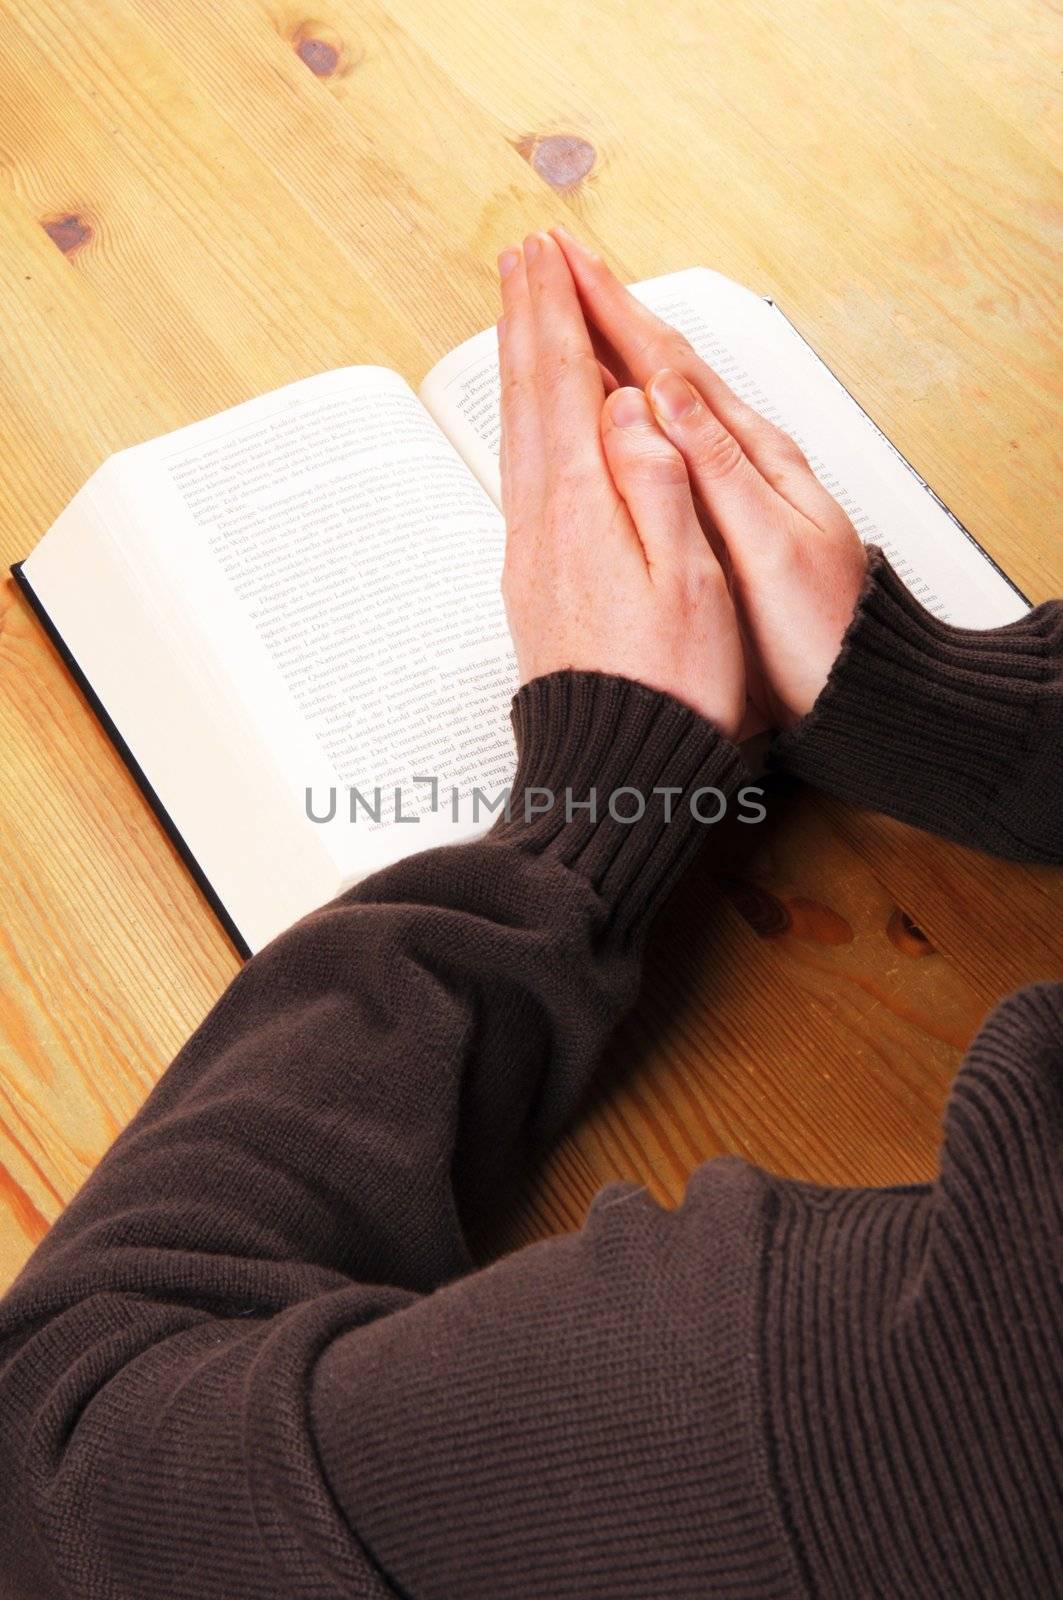 praying hands and book showing christian religion concept